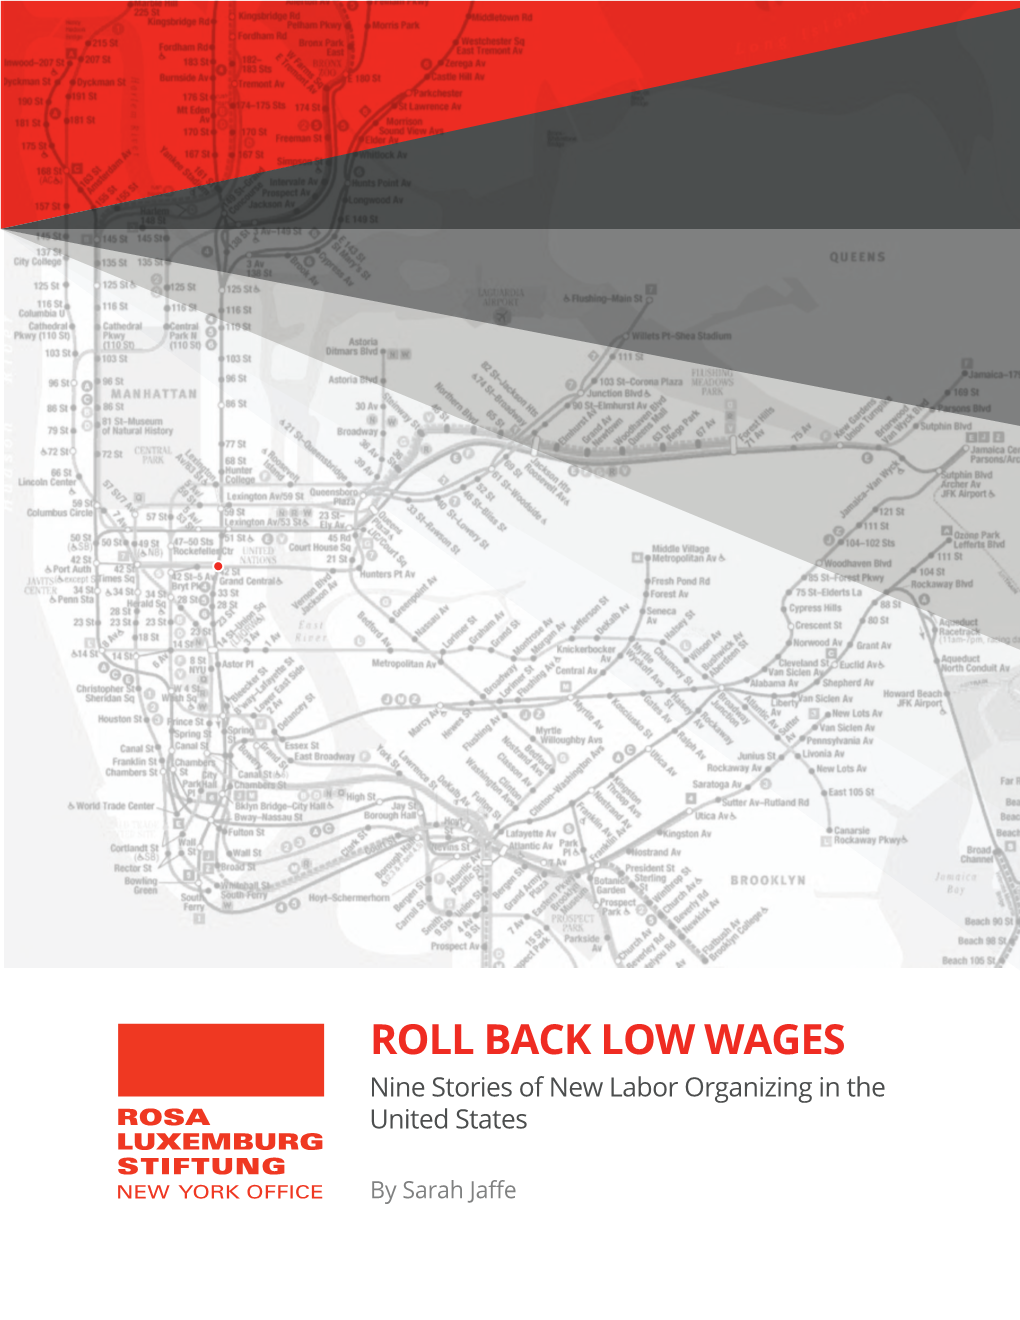 ROLL BACK LOW WAGES Nine Stories of New Labor Organizing in the ROSA United States LUXEMBURG STIFTUNG NEW YORK OFFICE by Sarah Jaffe Table of Contents